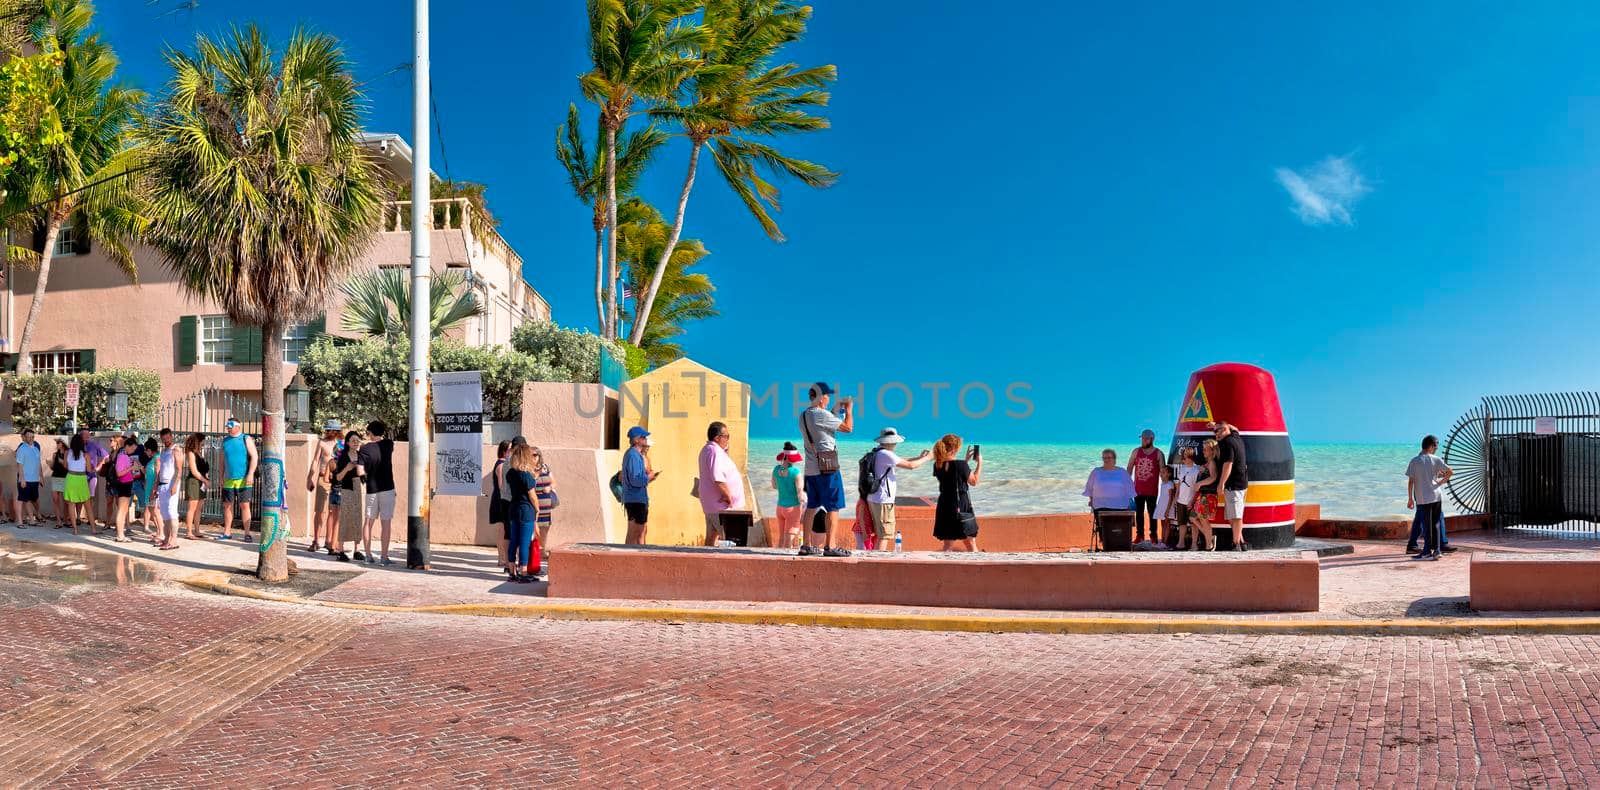 Key West, Florida, USA, March 30 2022: The Key West marker the southernmost point on the continental USA and distance to Cuba, Florida, USA. Famous tourist attraction in Key West. Tourists waiting in row to tak photo.